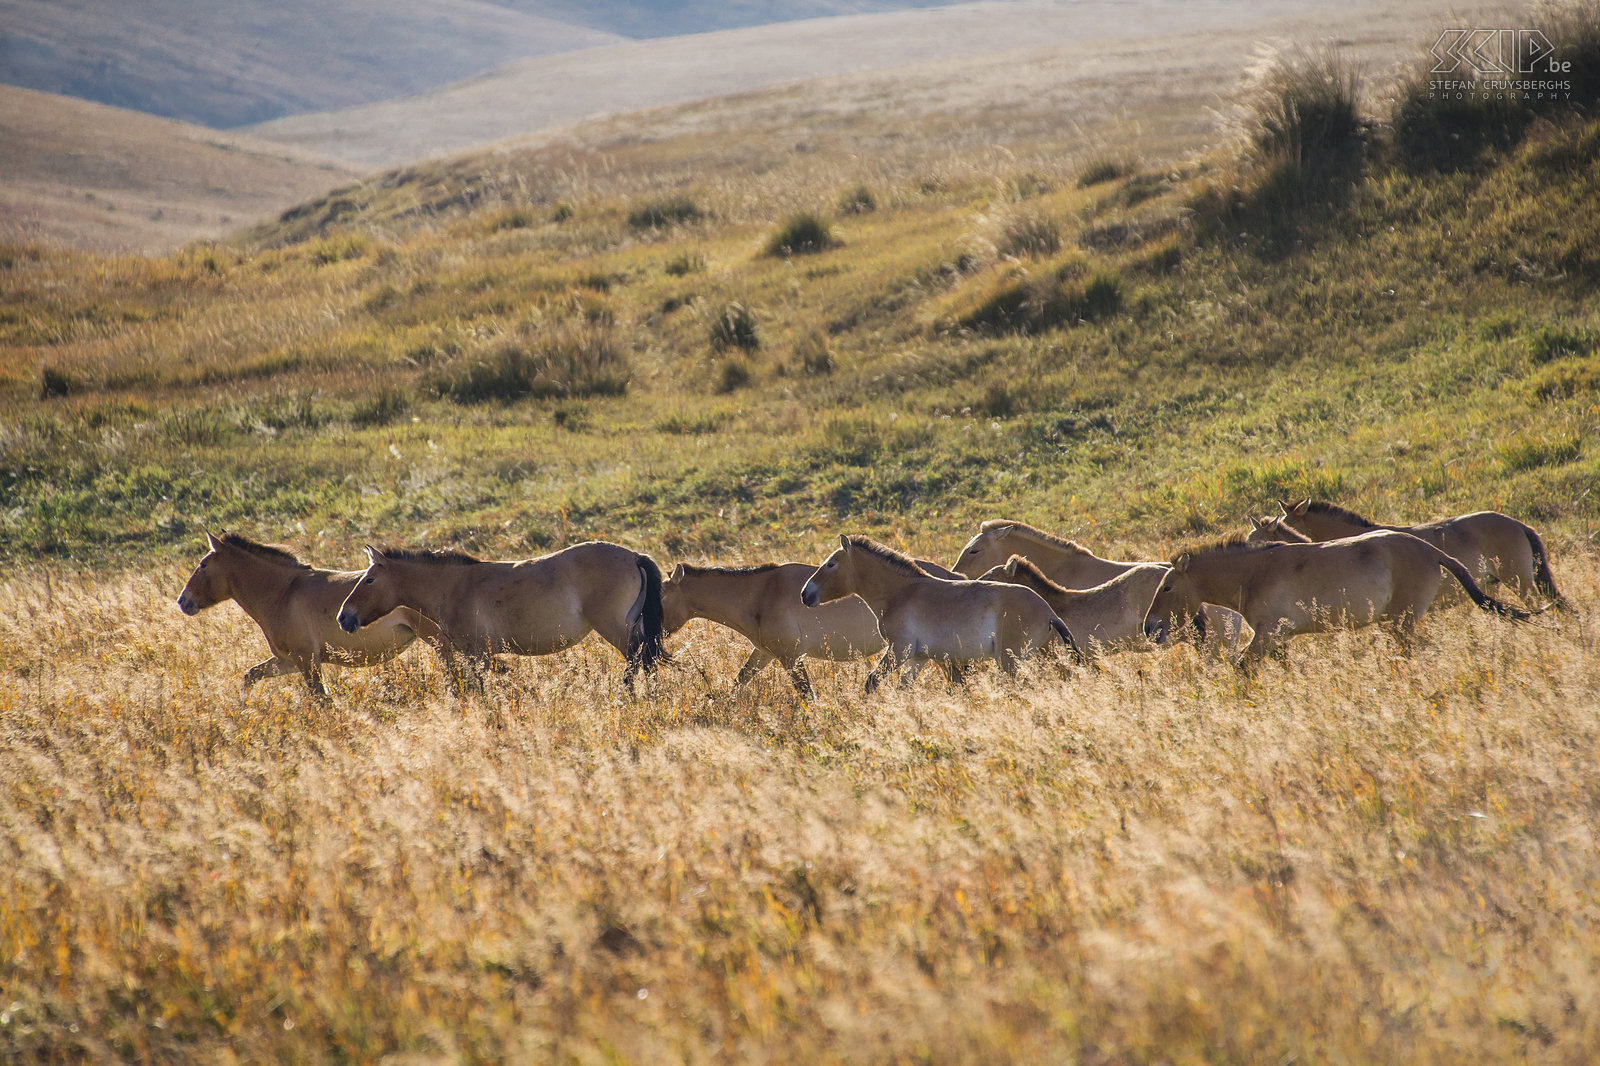 Hustai - Przewalski horses A herd of wild Przewalski horses in Hustai/Khustain Nuruu national park. The traditional Mongolian horse race Przewalski, takhi in Mongolian, has been reintroduced there 20 years ago. Now more than 250 wild horses life in this national park. Stefan Cruysberghs